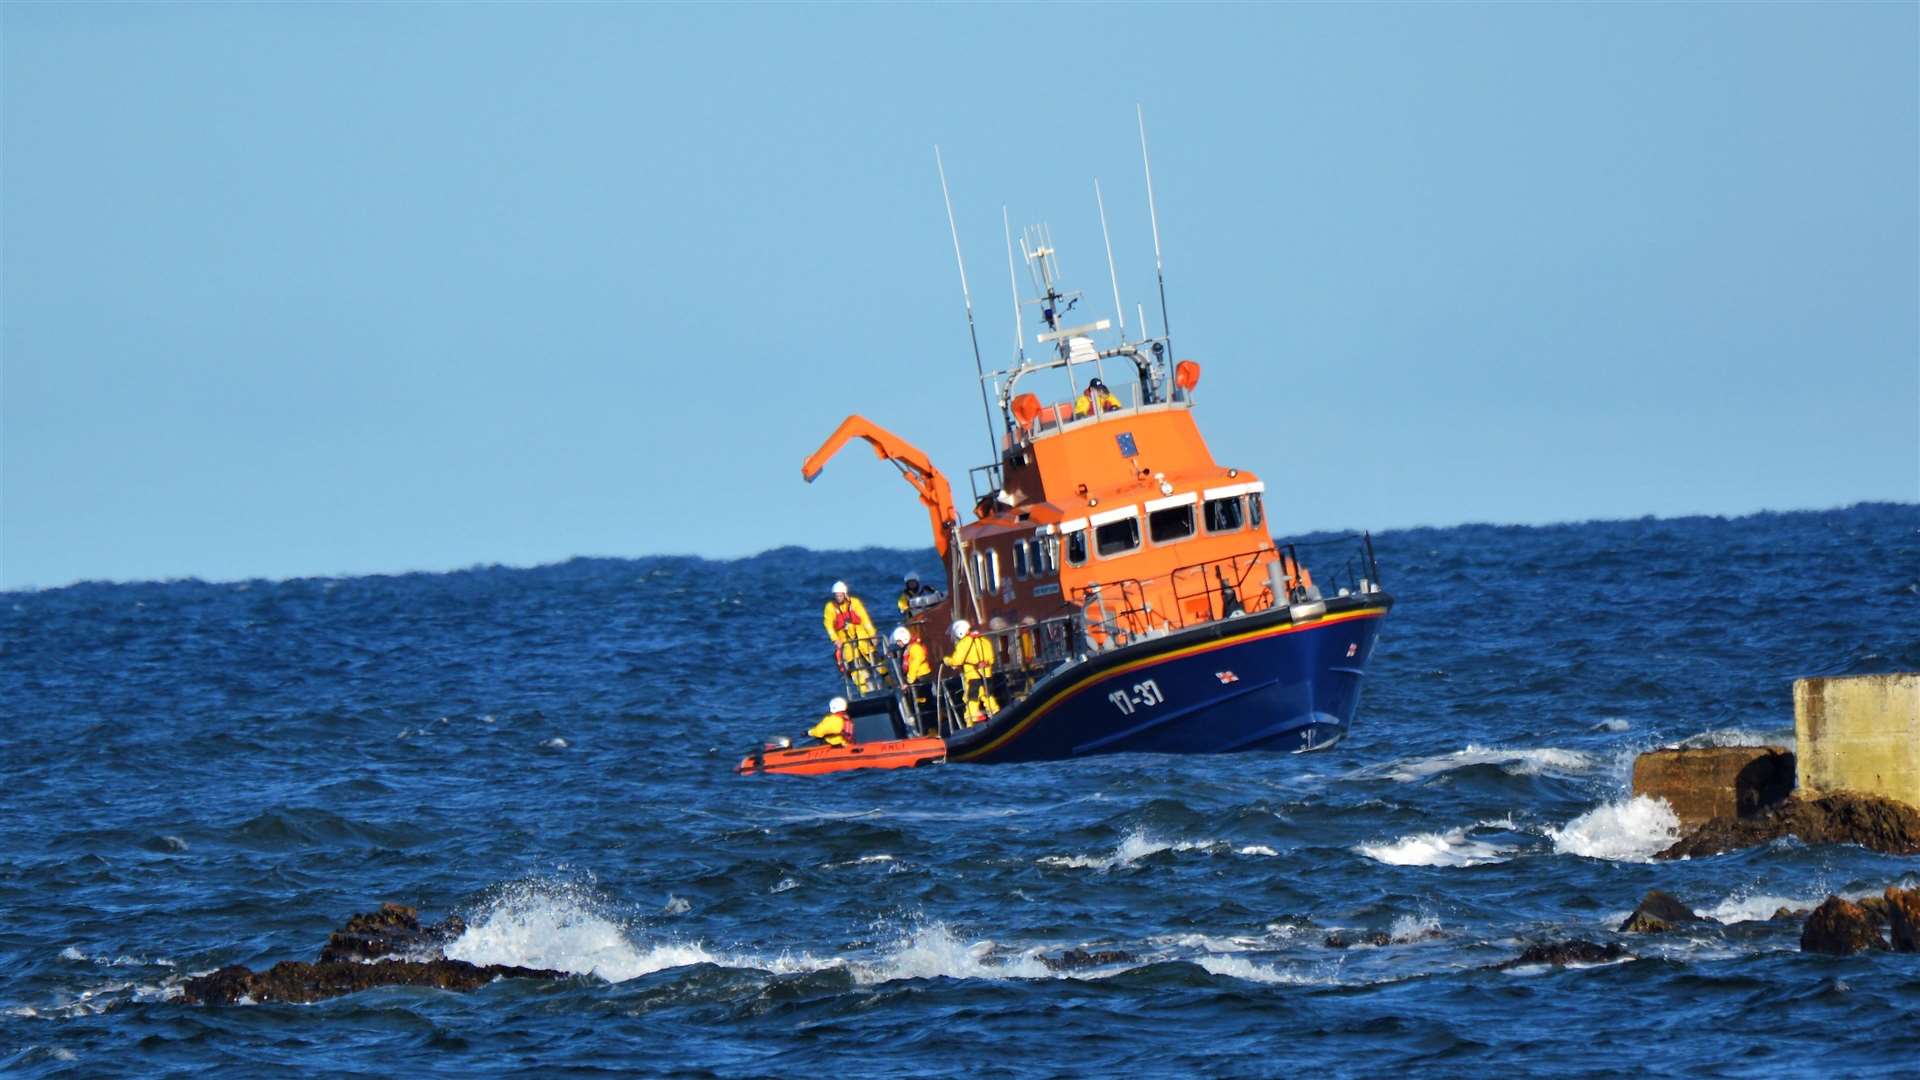 The RNLI team from Buckie were called to help at an incident on Friday afternoon.